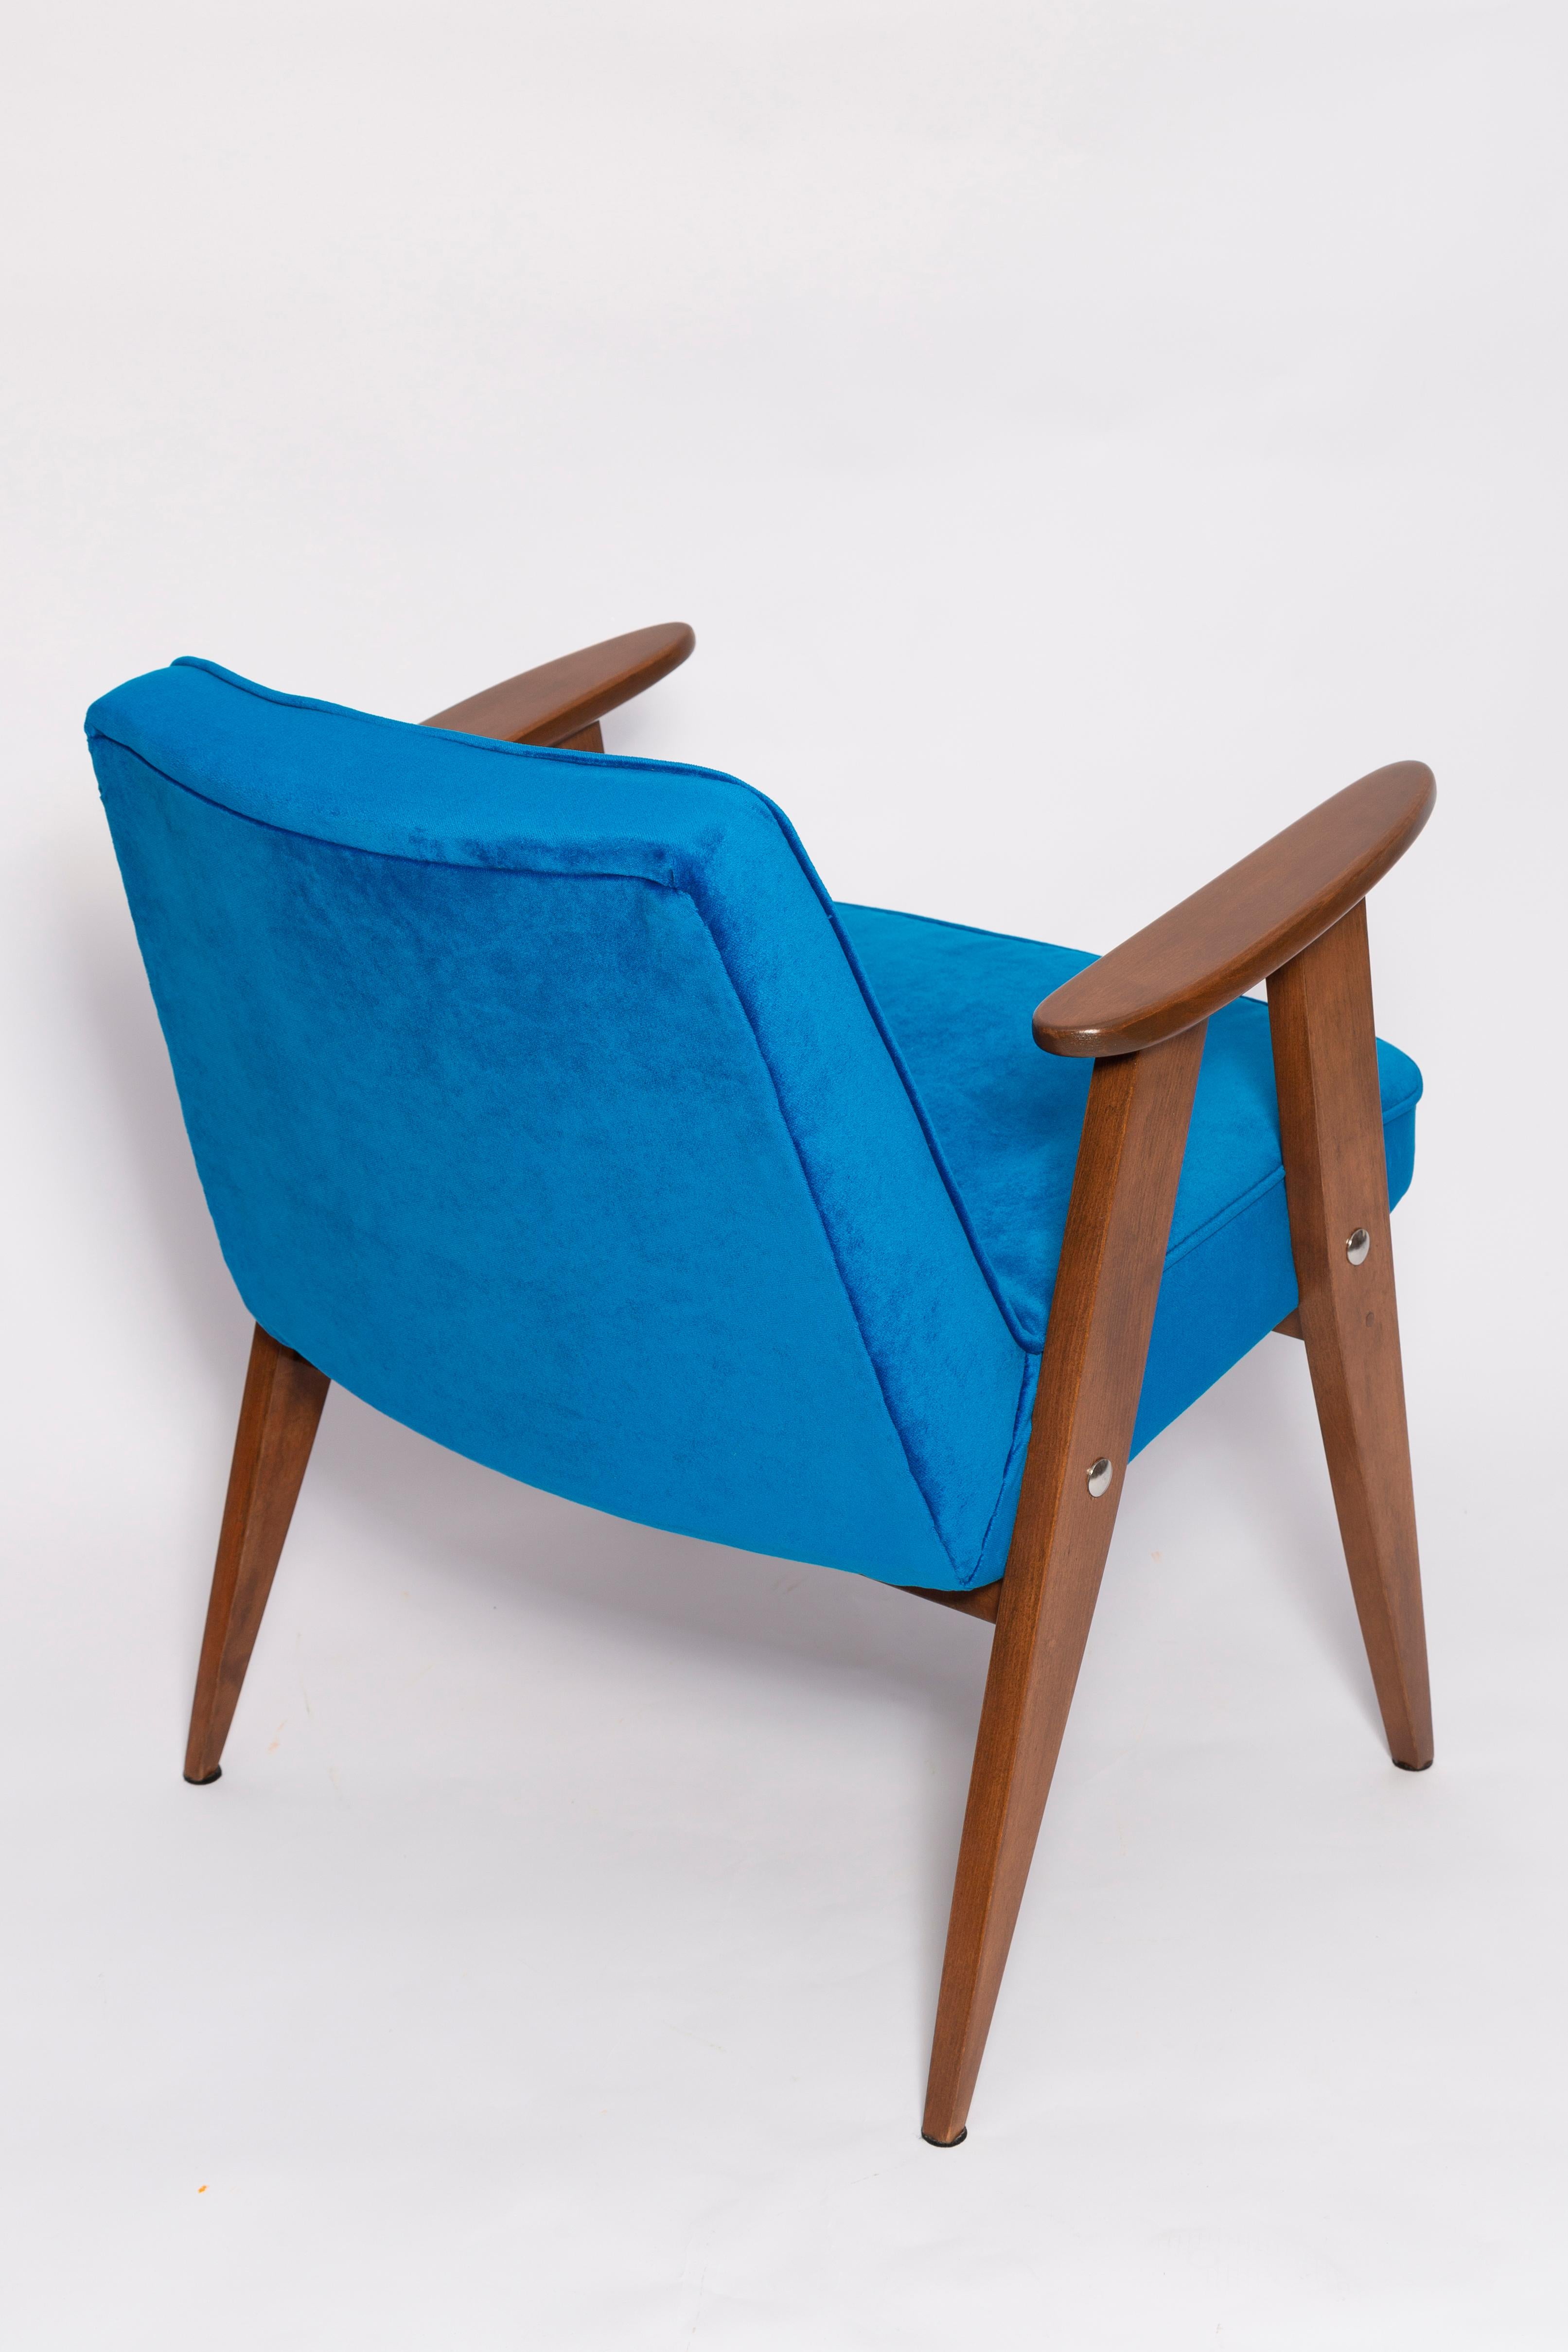 20th Century Pair of Mid-Century 366 Armchairs, Pink and Blue, by Chierowski Europe, 1960s For Sale